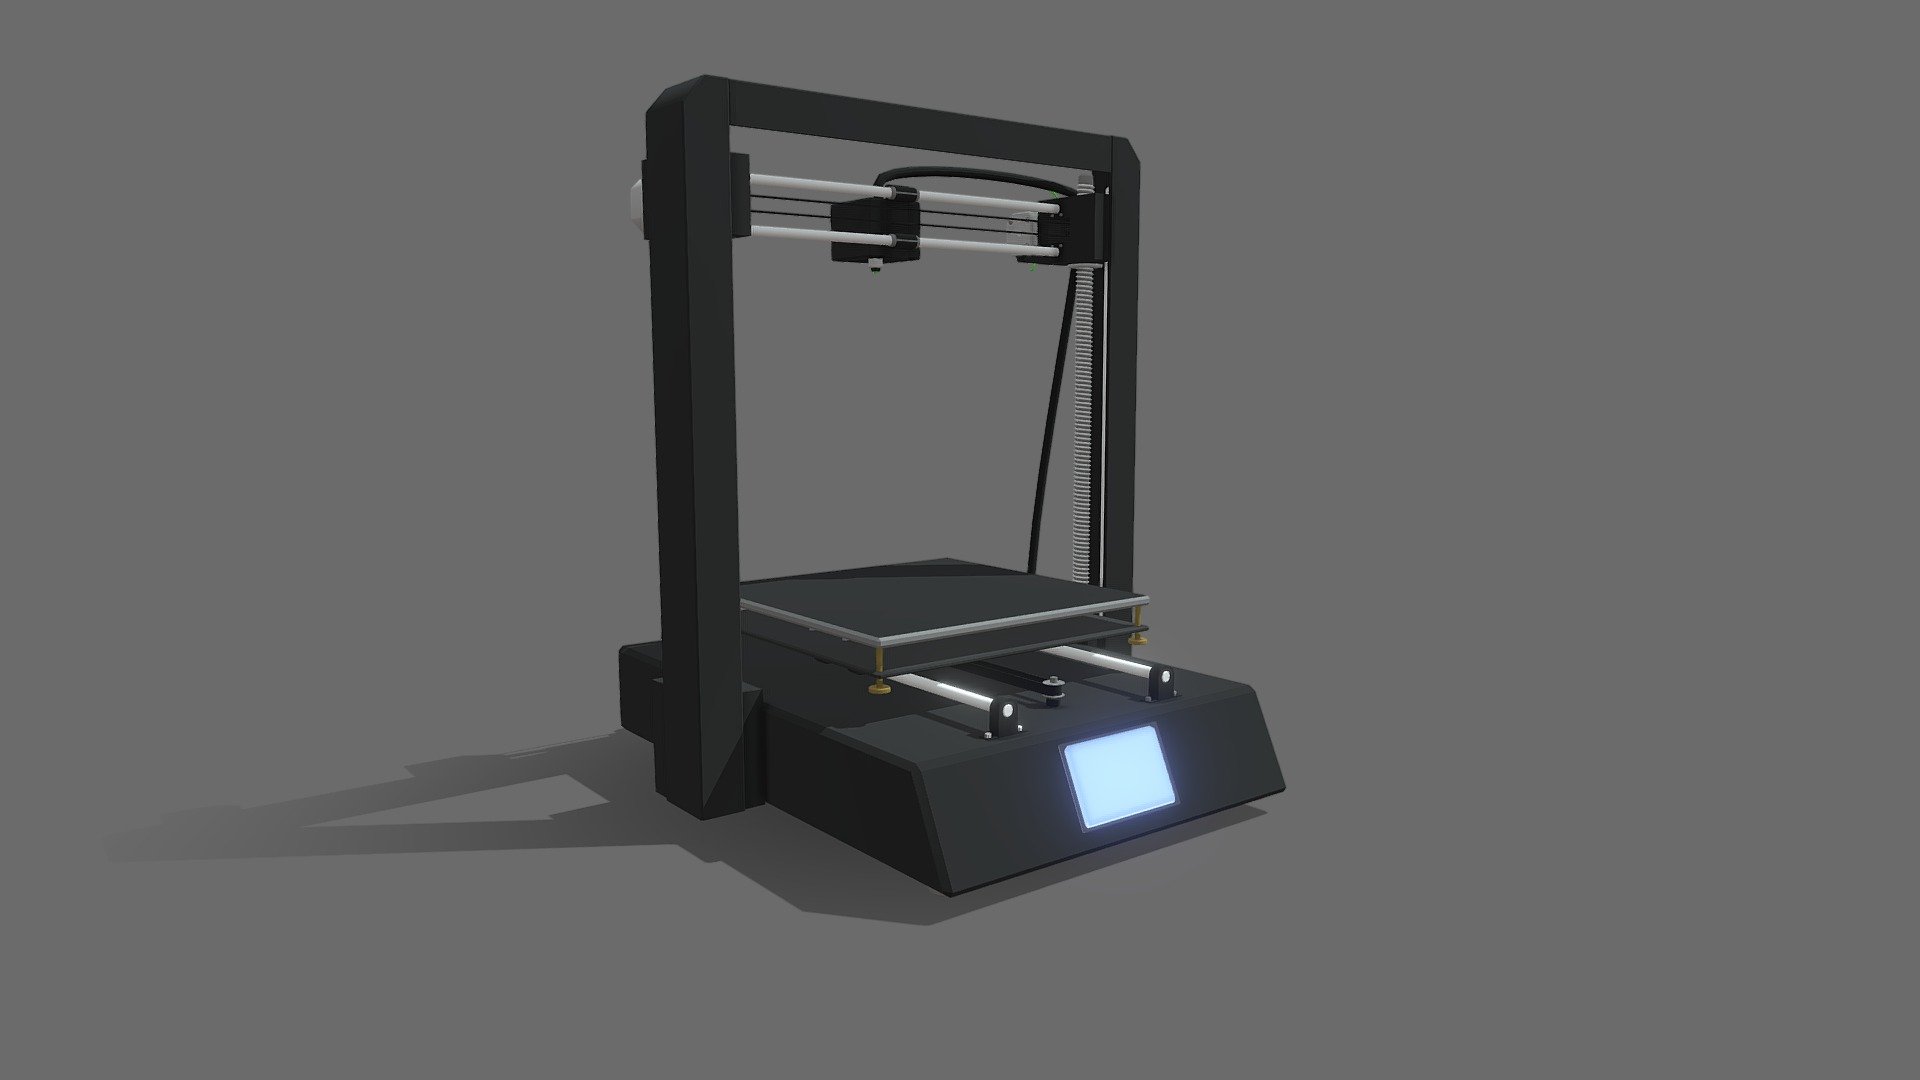 3d-printer-download-free-3d-model-by-gregsterius-0e825a8-sketchfab